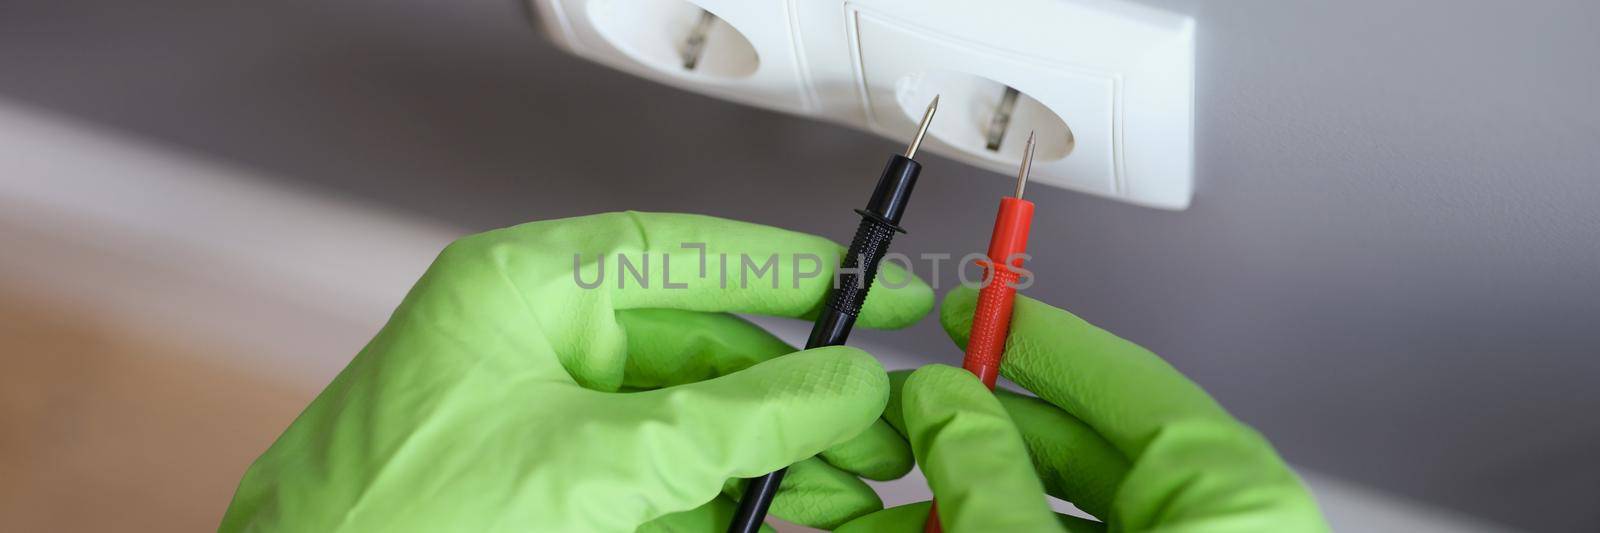 Measuring voltage with a multimeter, hands in rubber gloves close-up. Measuring instrument for electrical repair and maintenance